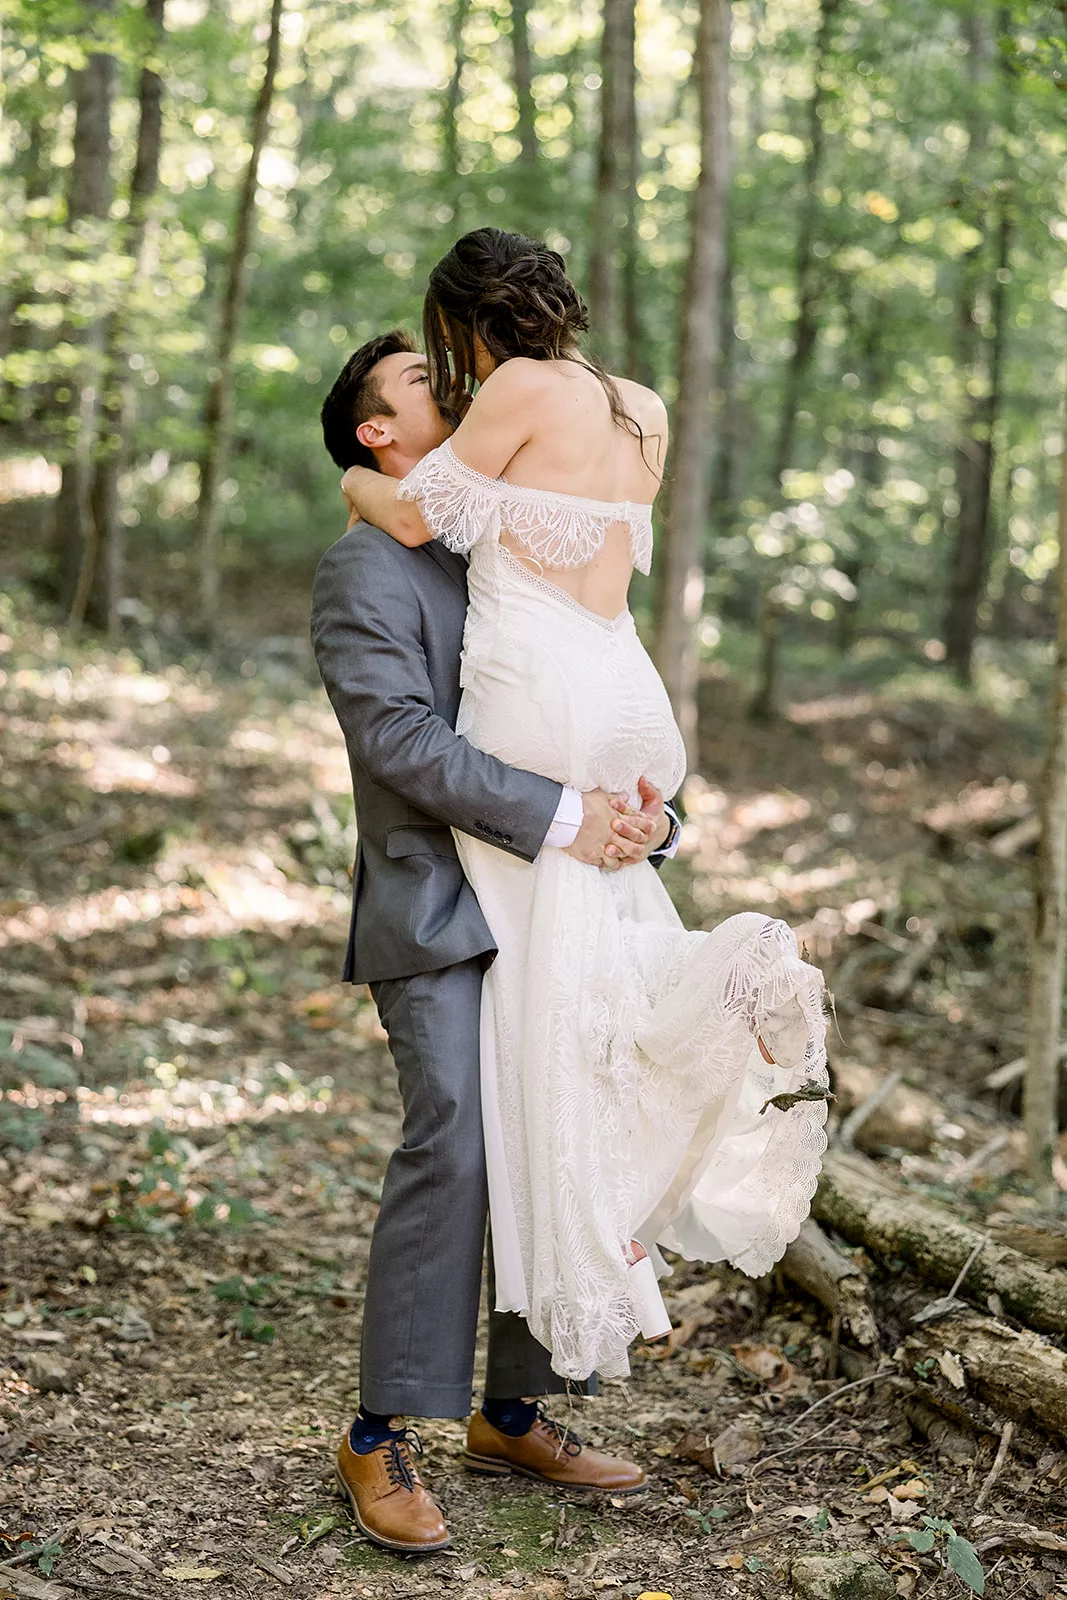 Newlyweds kiss while standing in the woods at a Sustainable Wedding Venue in Georgia